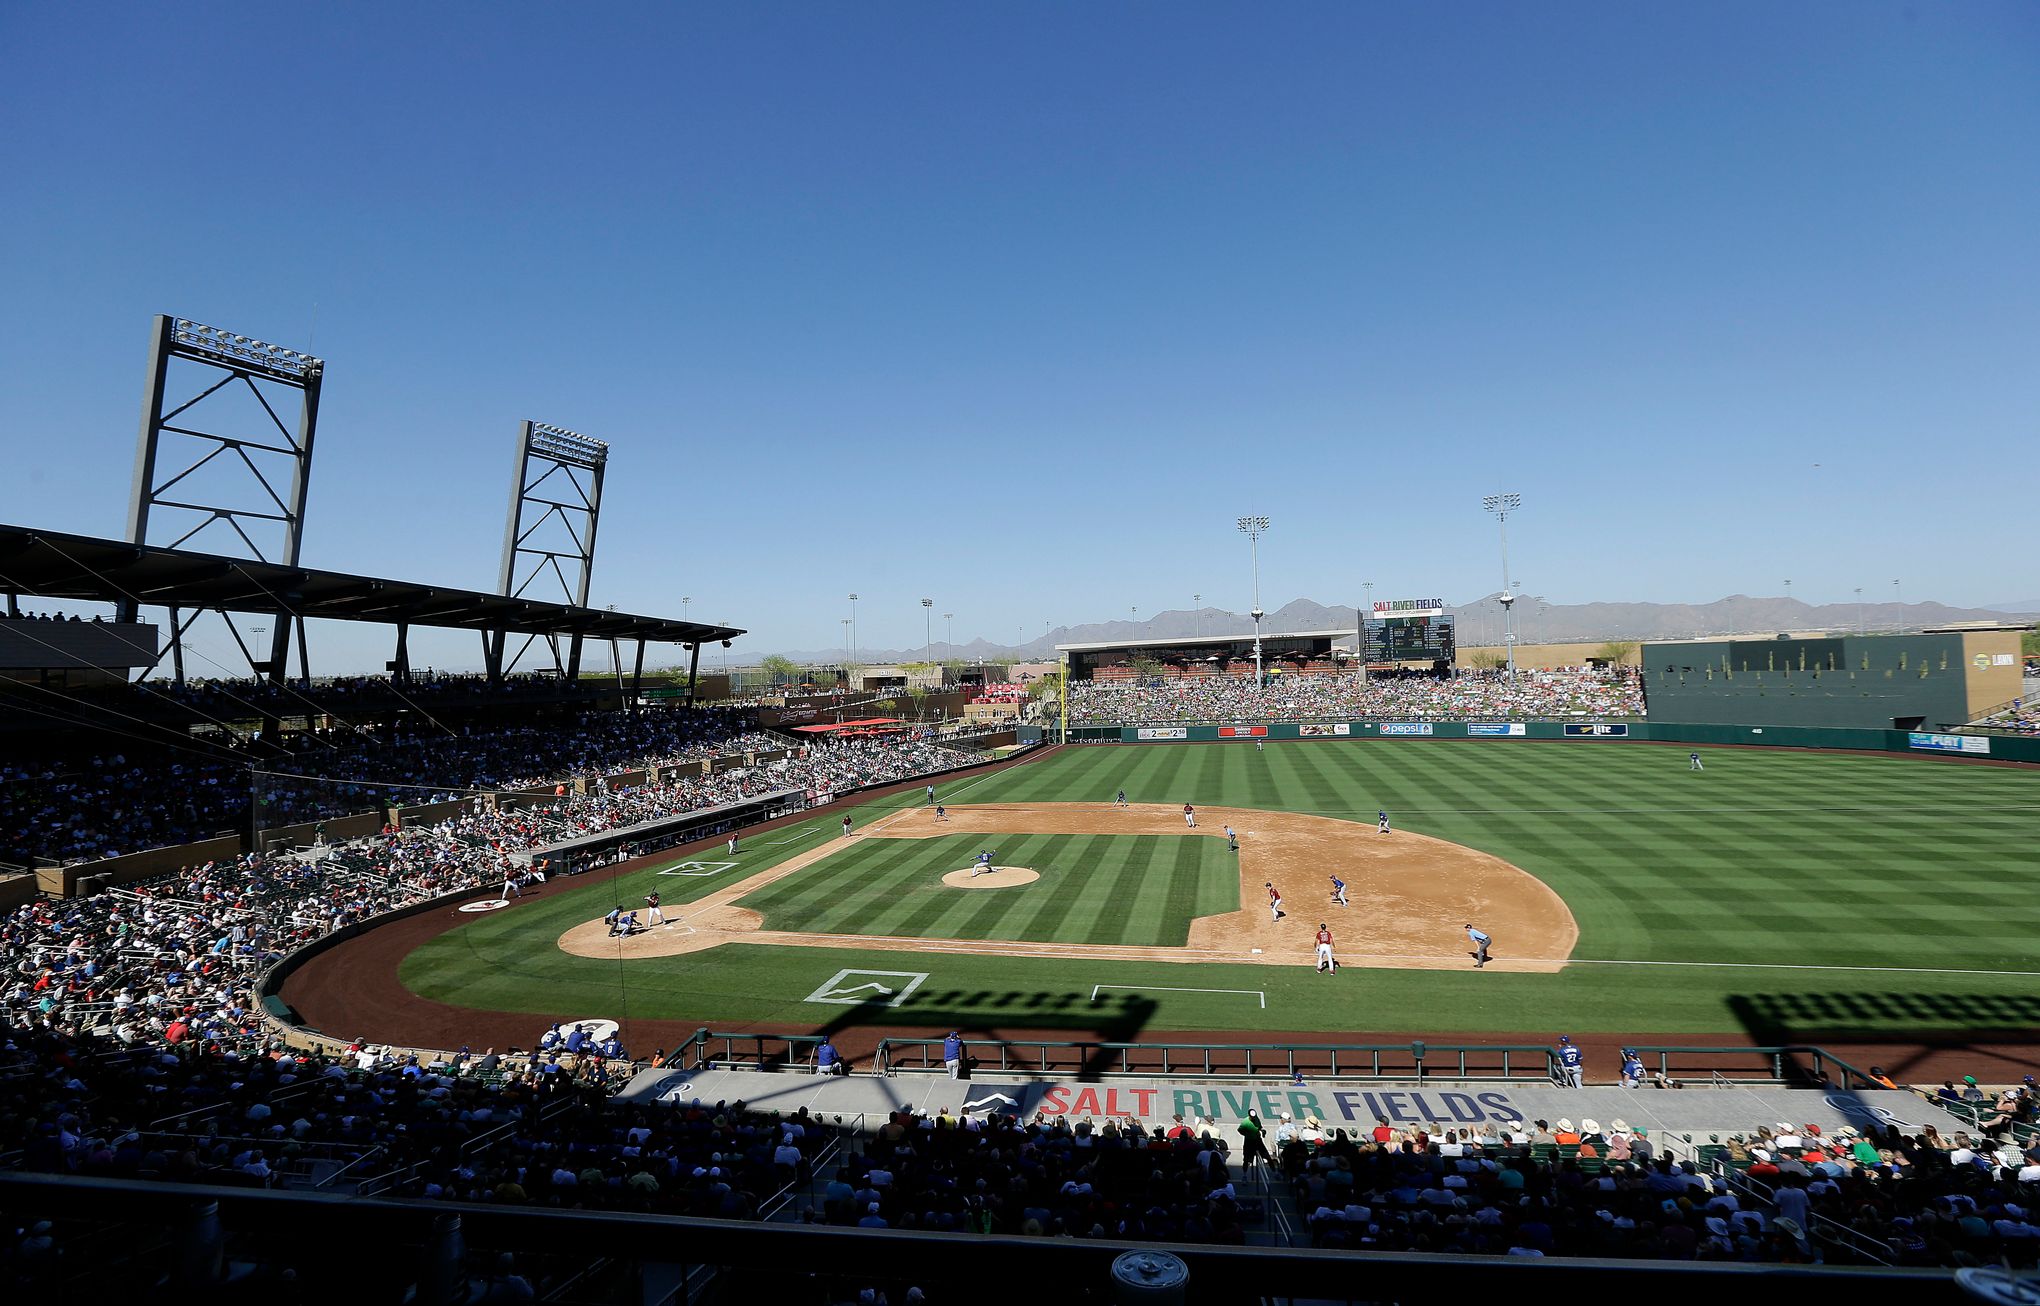 MLB spring training 2021: What to watch for as baseball returns